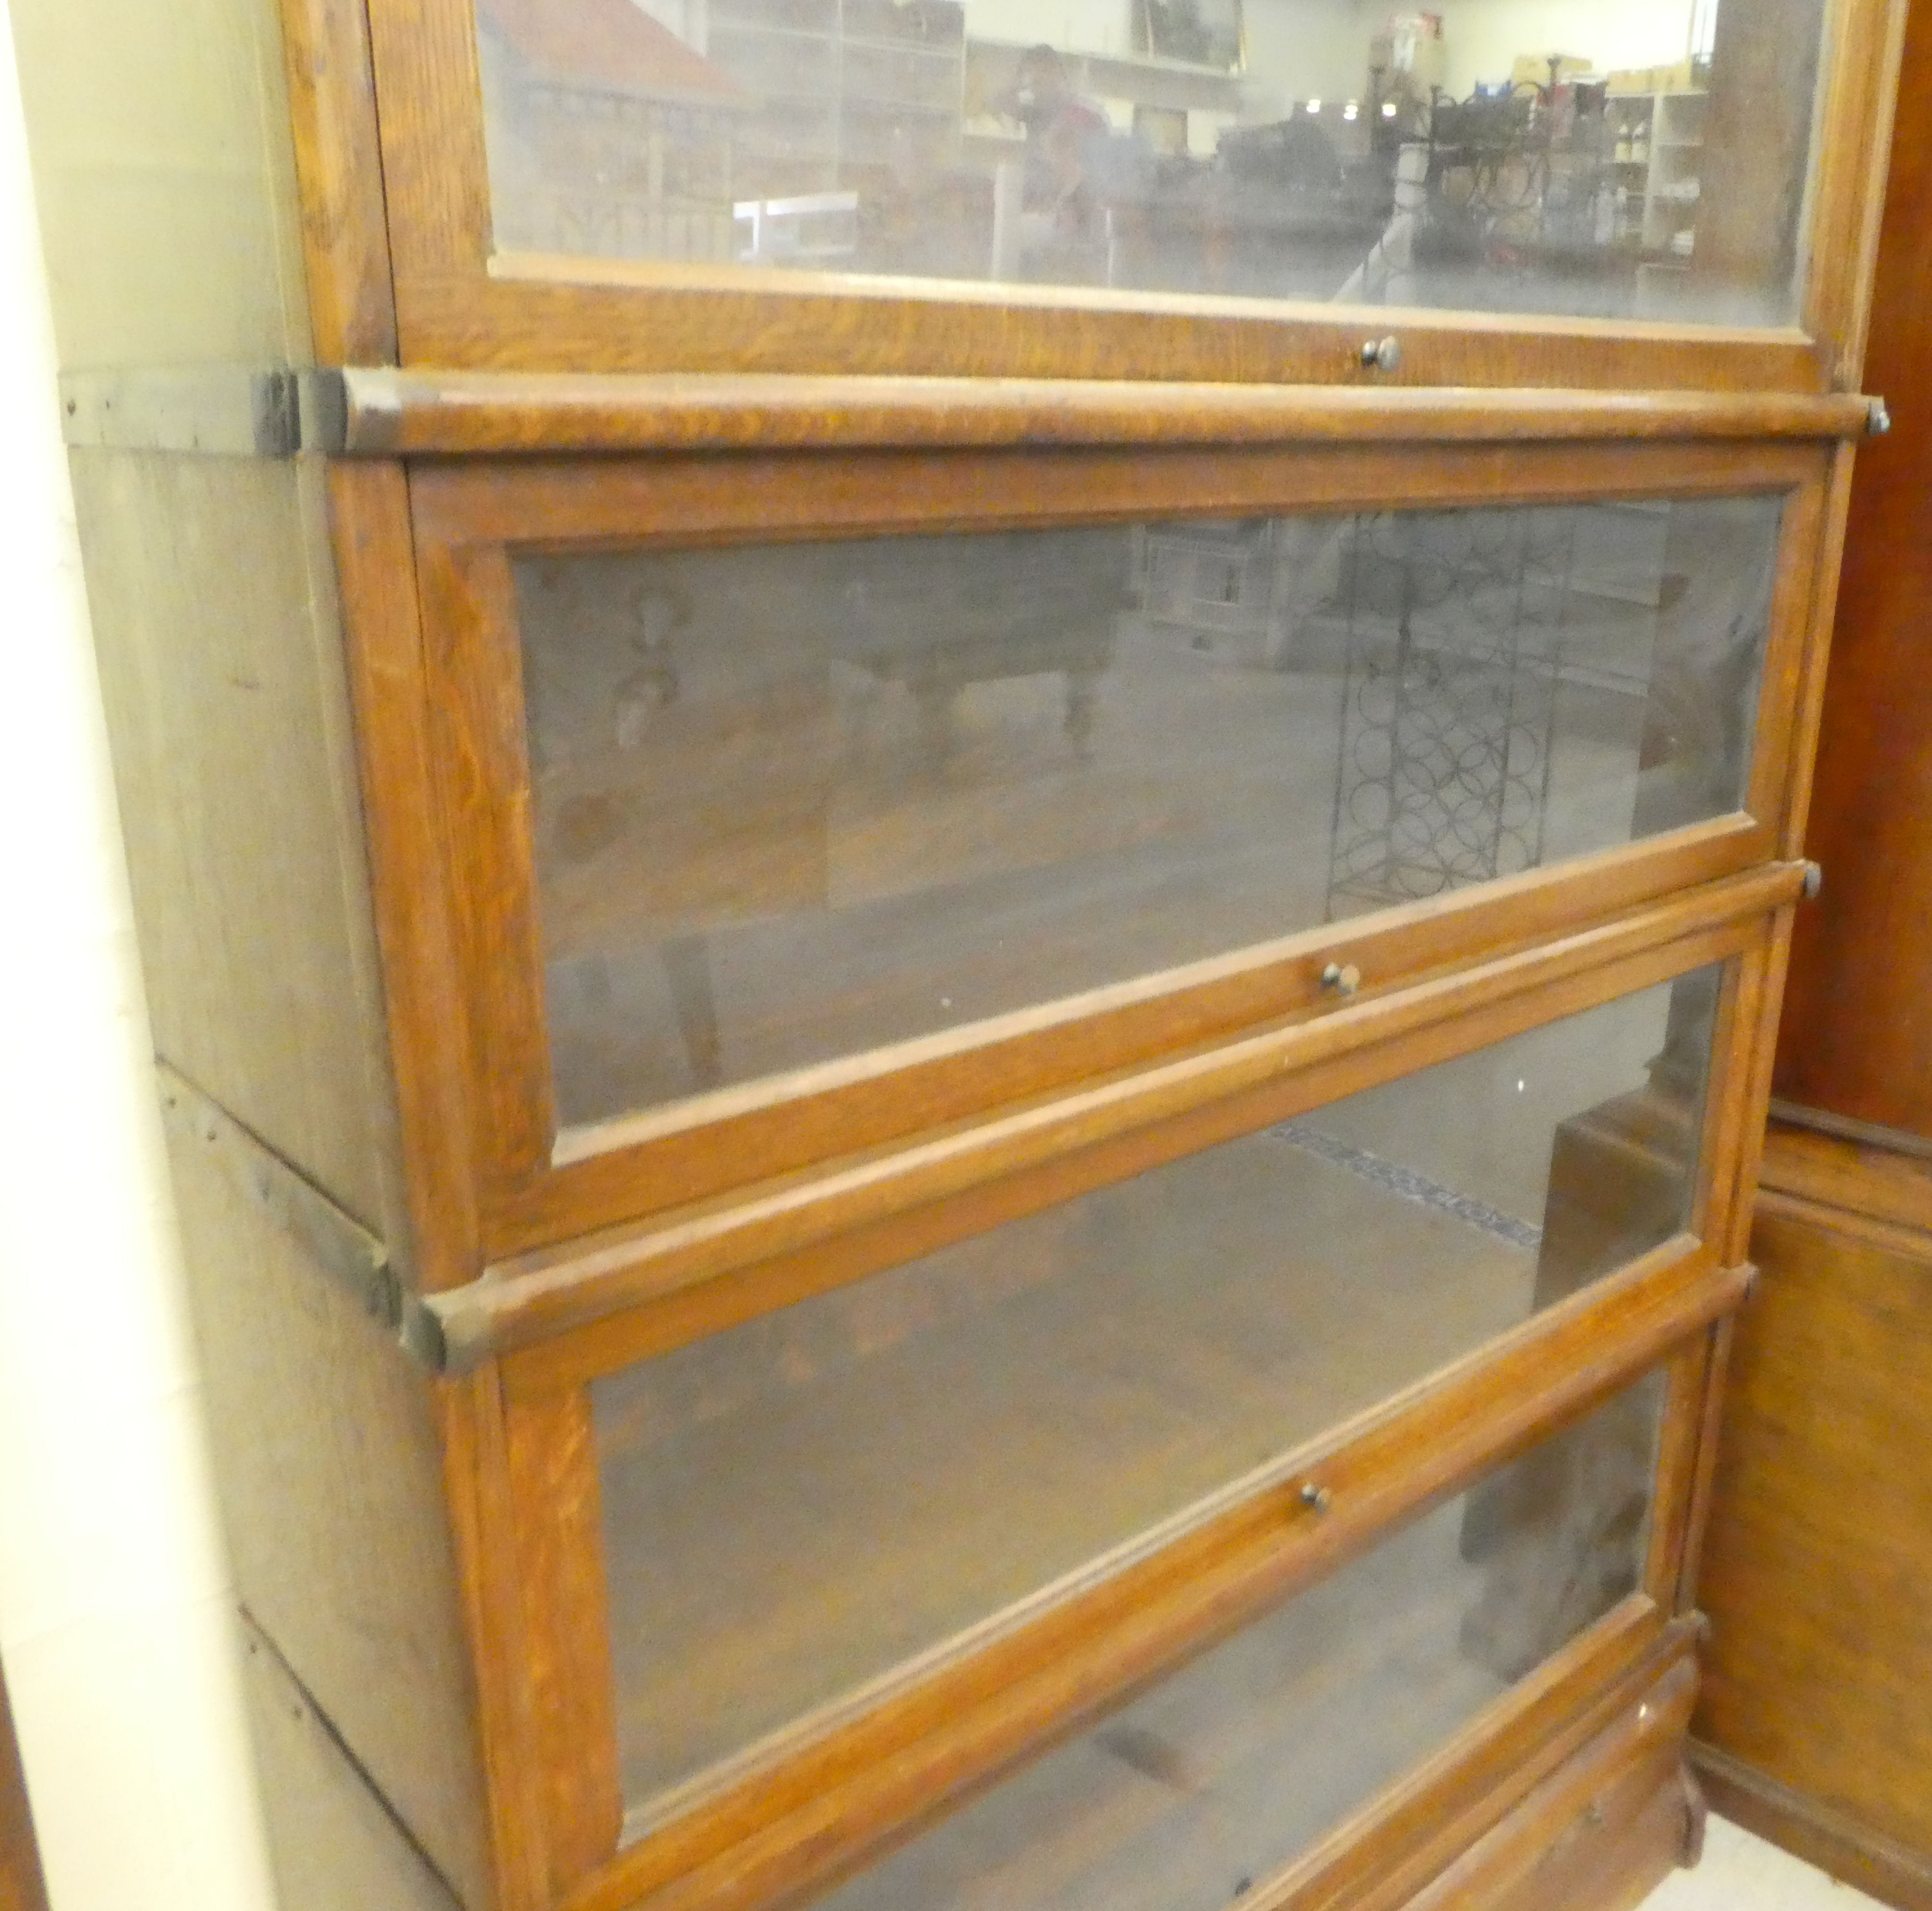 A 1920s/30s oak Globe Wernicke four section bookcase with lift and slide doors and a base drawer, on - Image 4 of 4